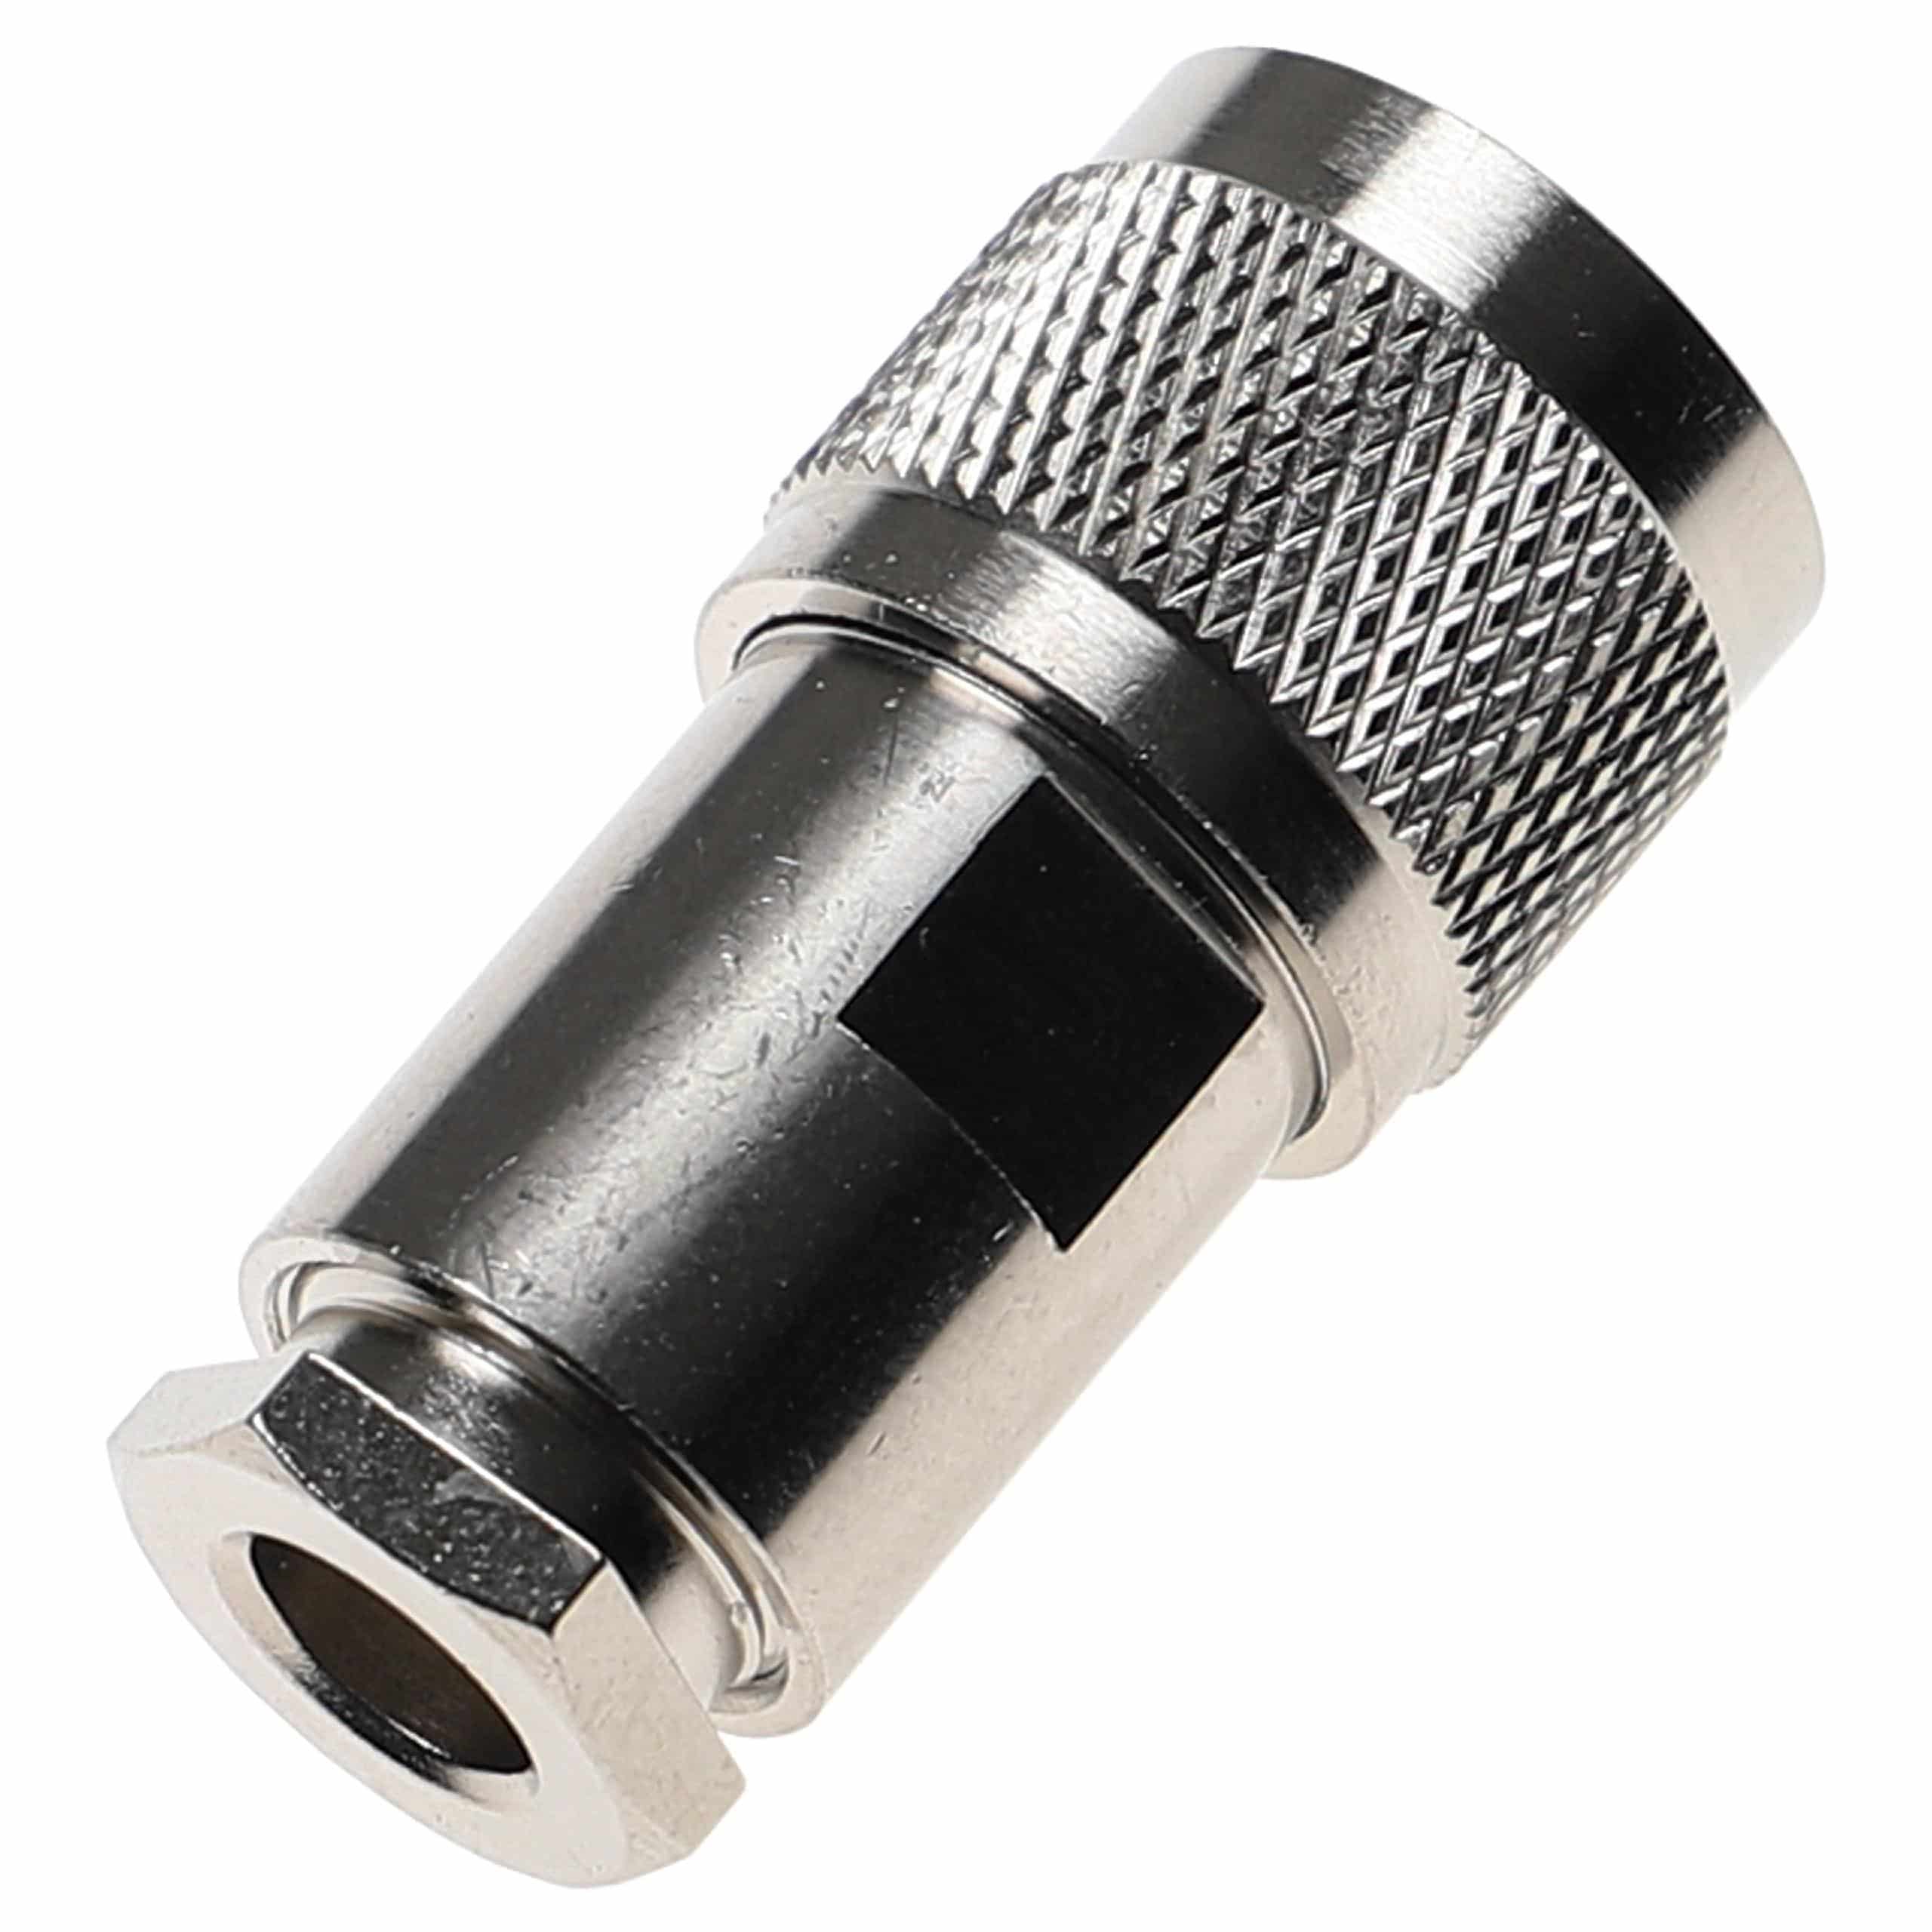 N Connector for Aircell-7, H2007, Ultraflex-7 Coaxial Cable - Coaxial Connector for GPS & WiFi Devices